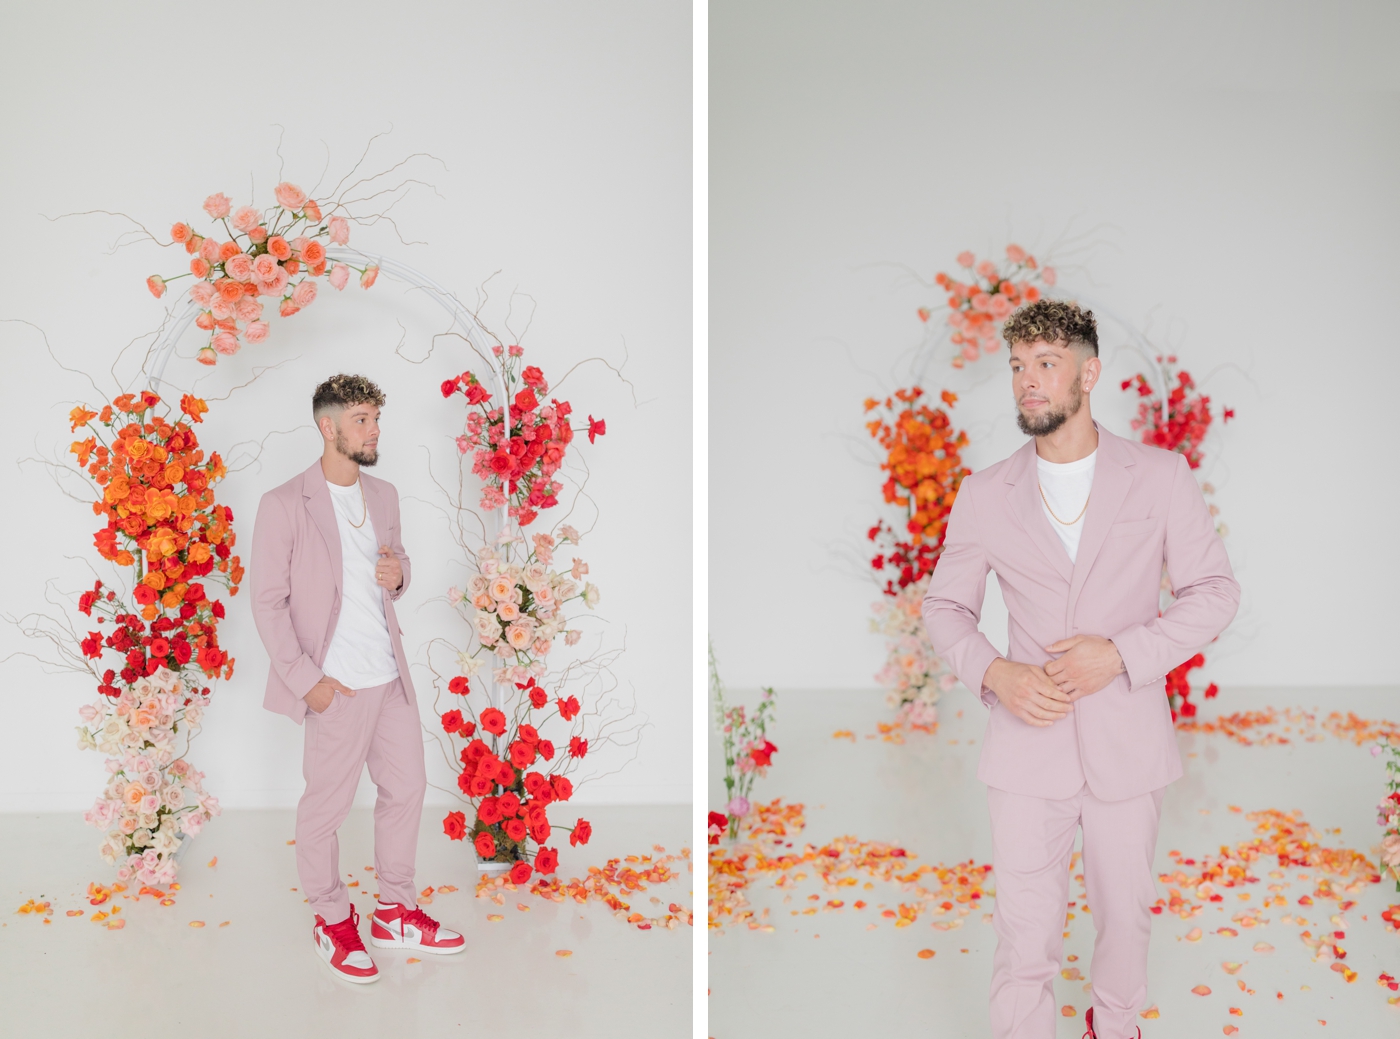 Groom wearing a pink suit with red Nike sneakers